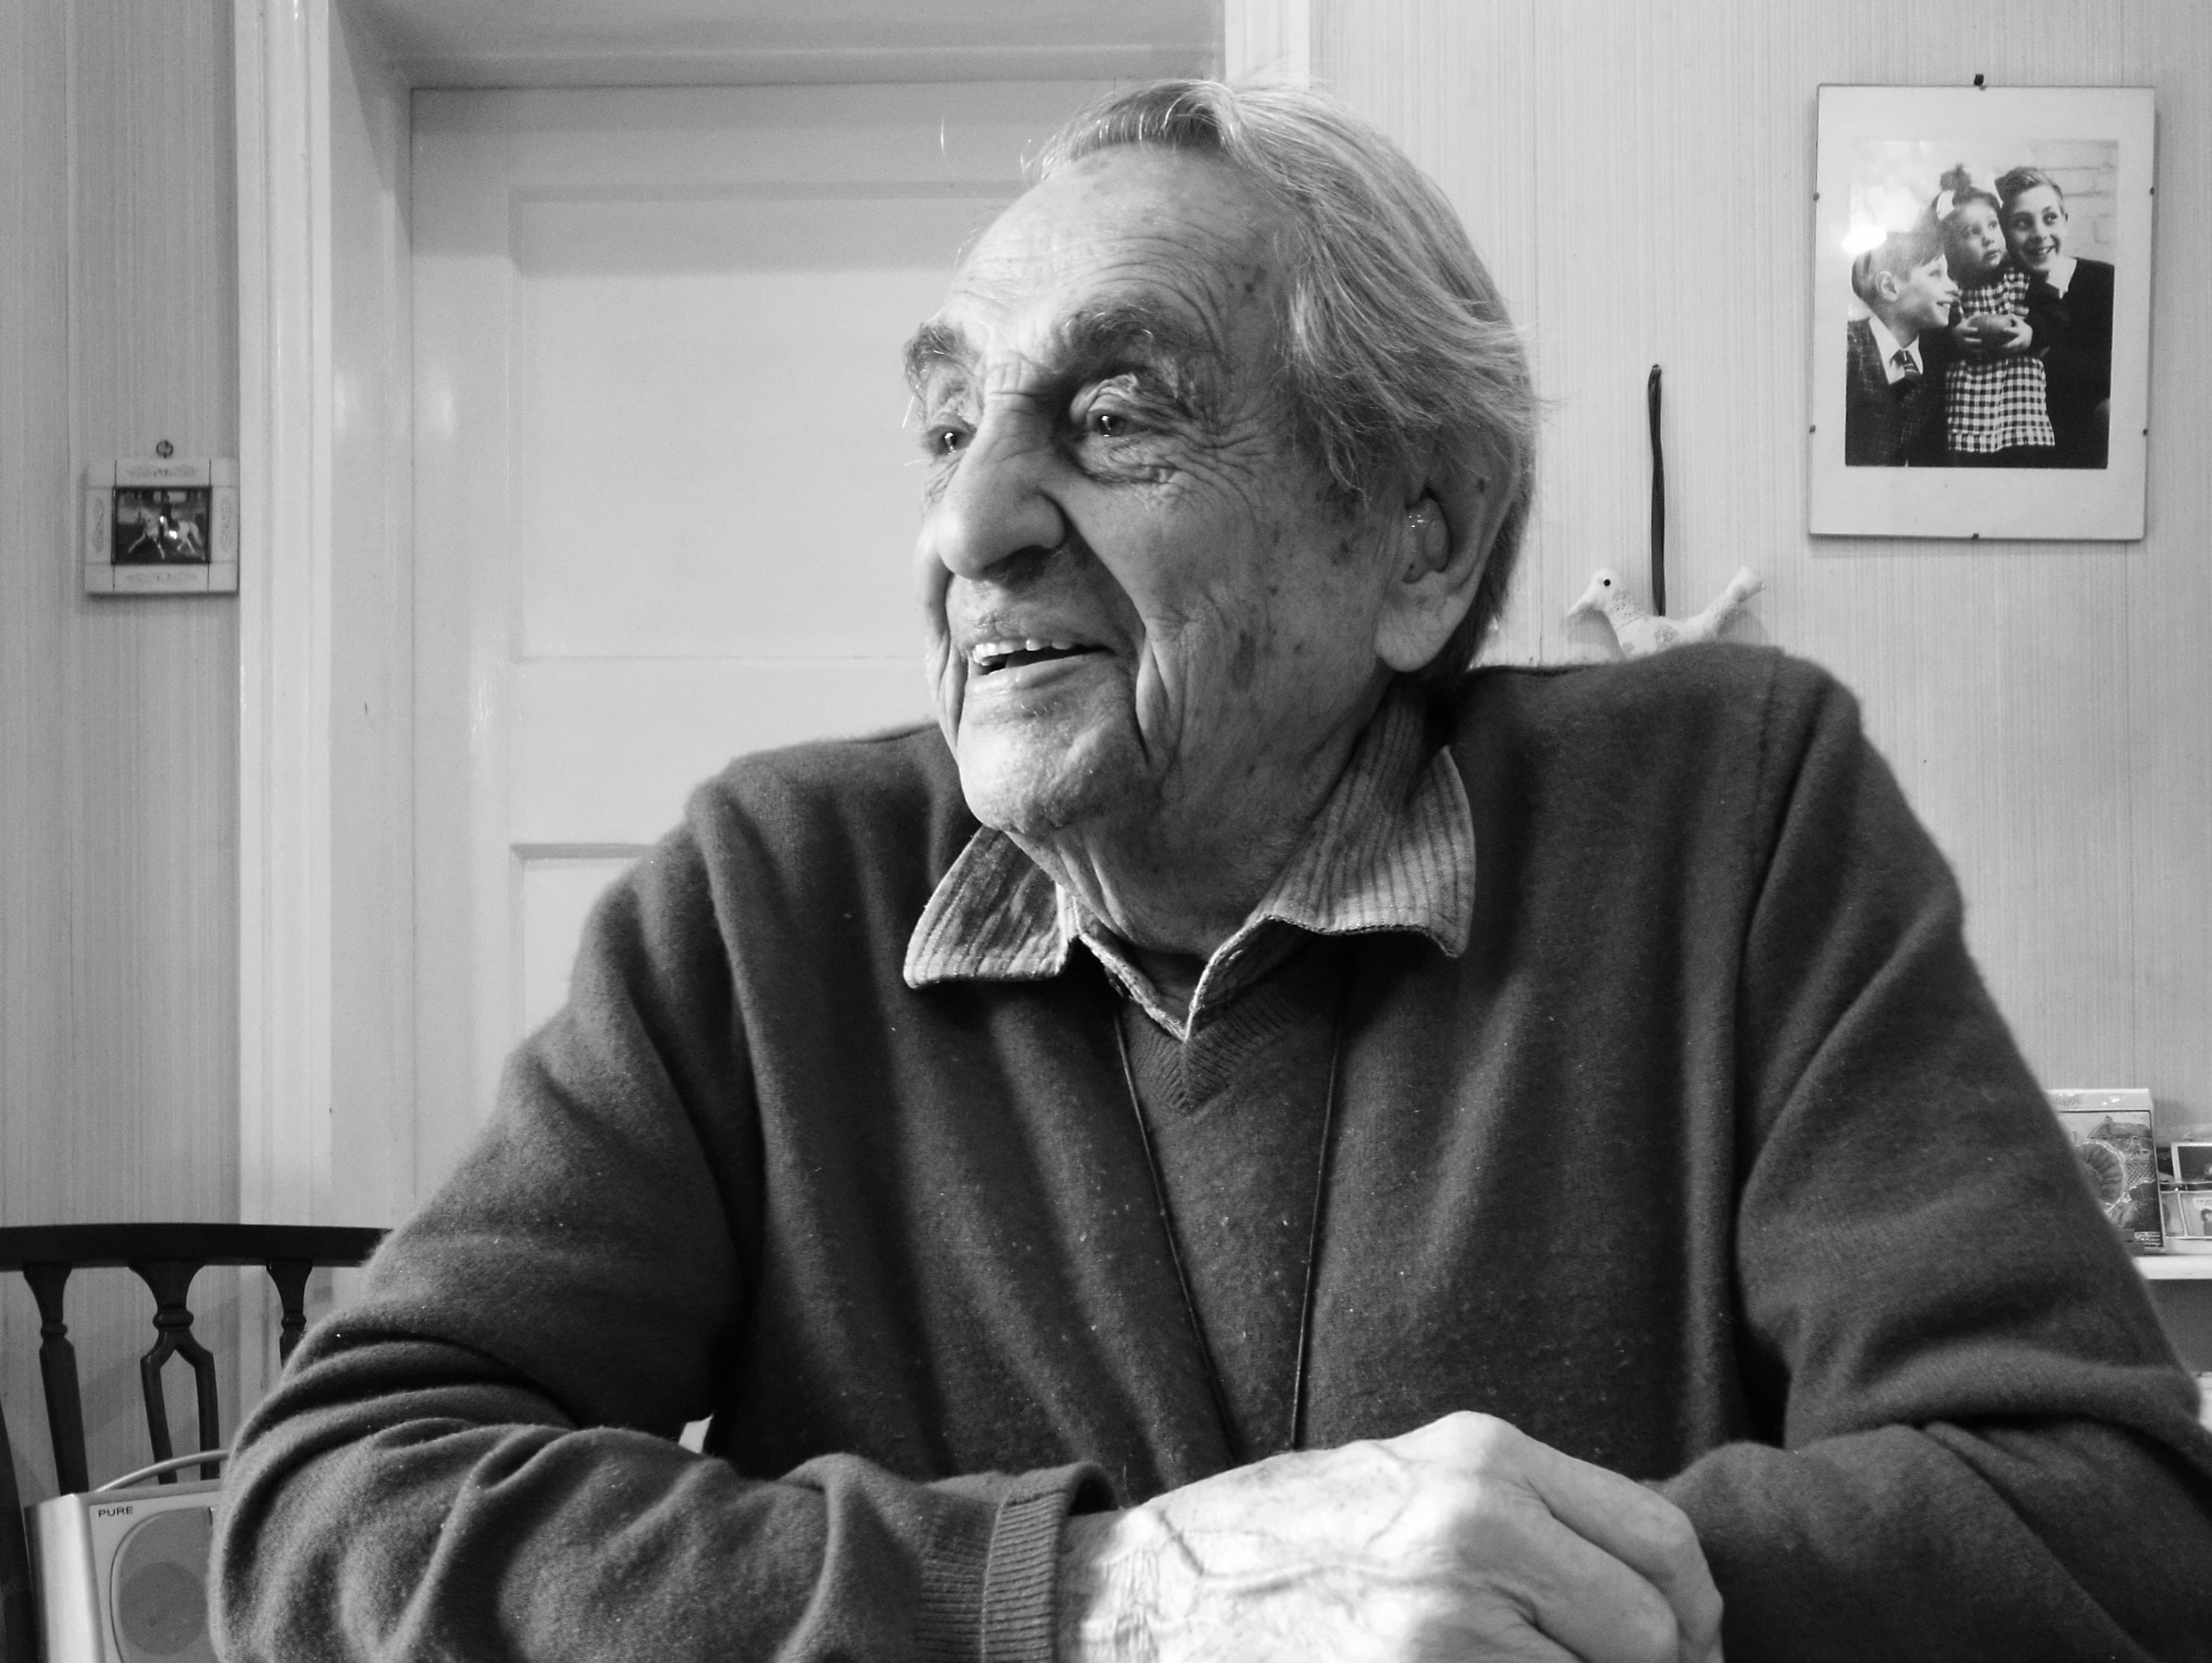 Rex Features photo agency founder Frank Selby dies aged 100